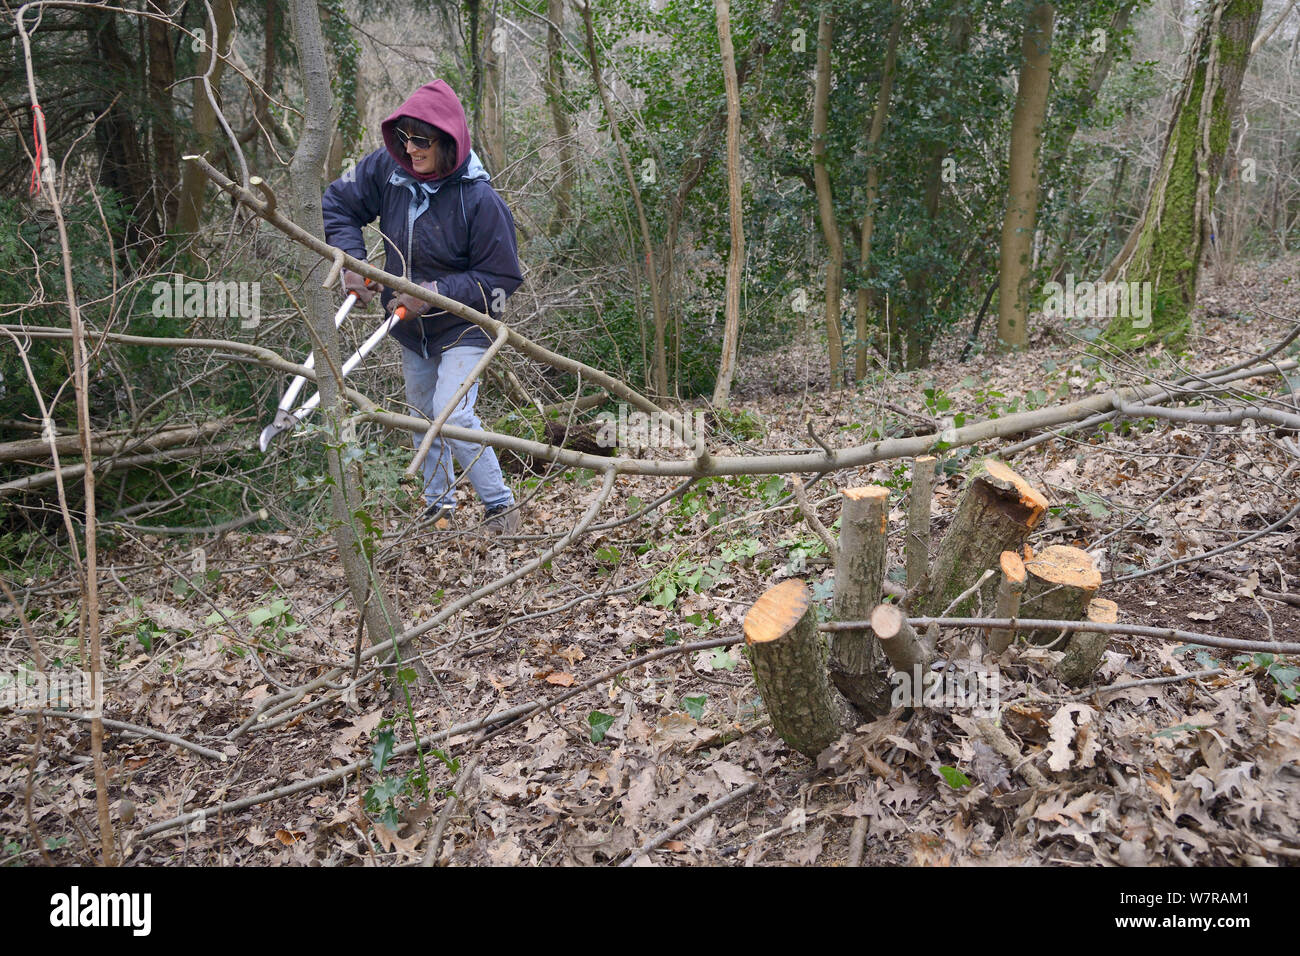 Backwell Enviroment Trust volunteer lopping branches off young tree coppiced to increase biodiversity and to improve the habitat for Hazel Dormice (Muscardinus avellanarius) in woodland near Bristol, Somerset, UK, March. Stock Photo